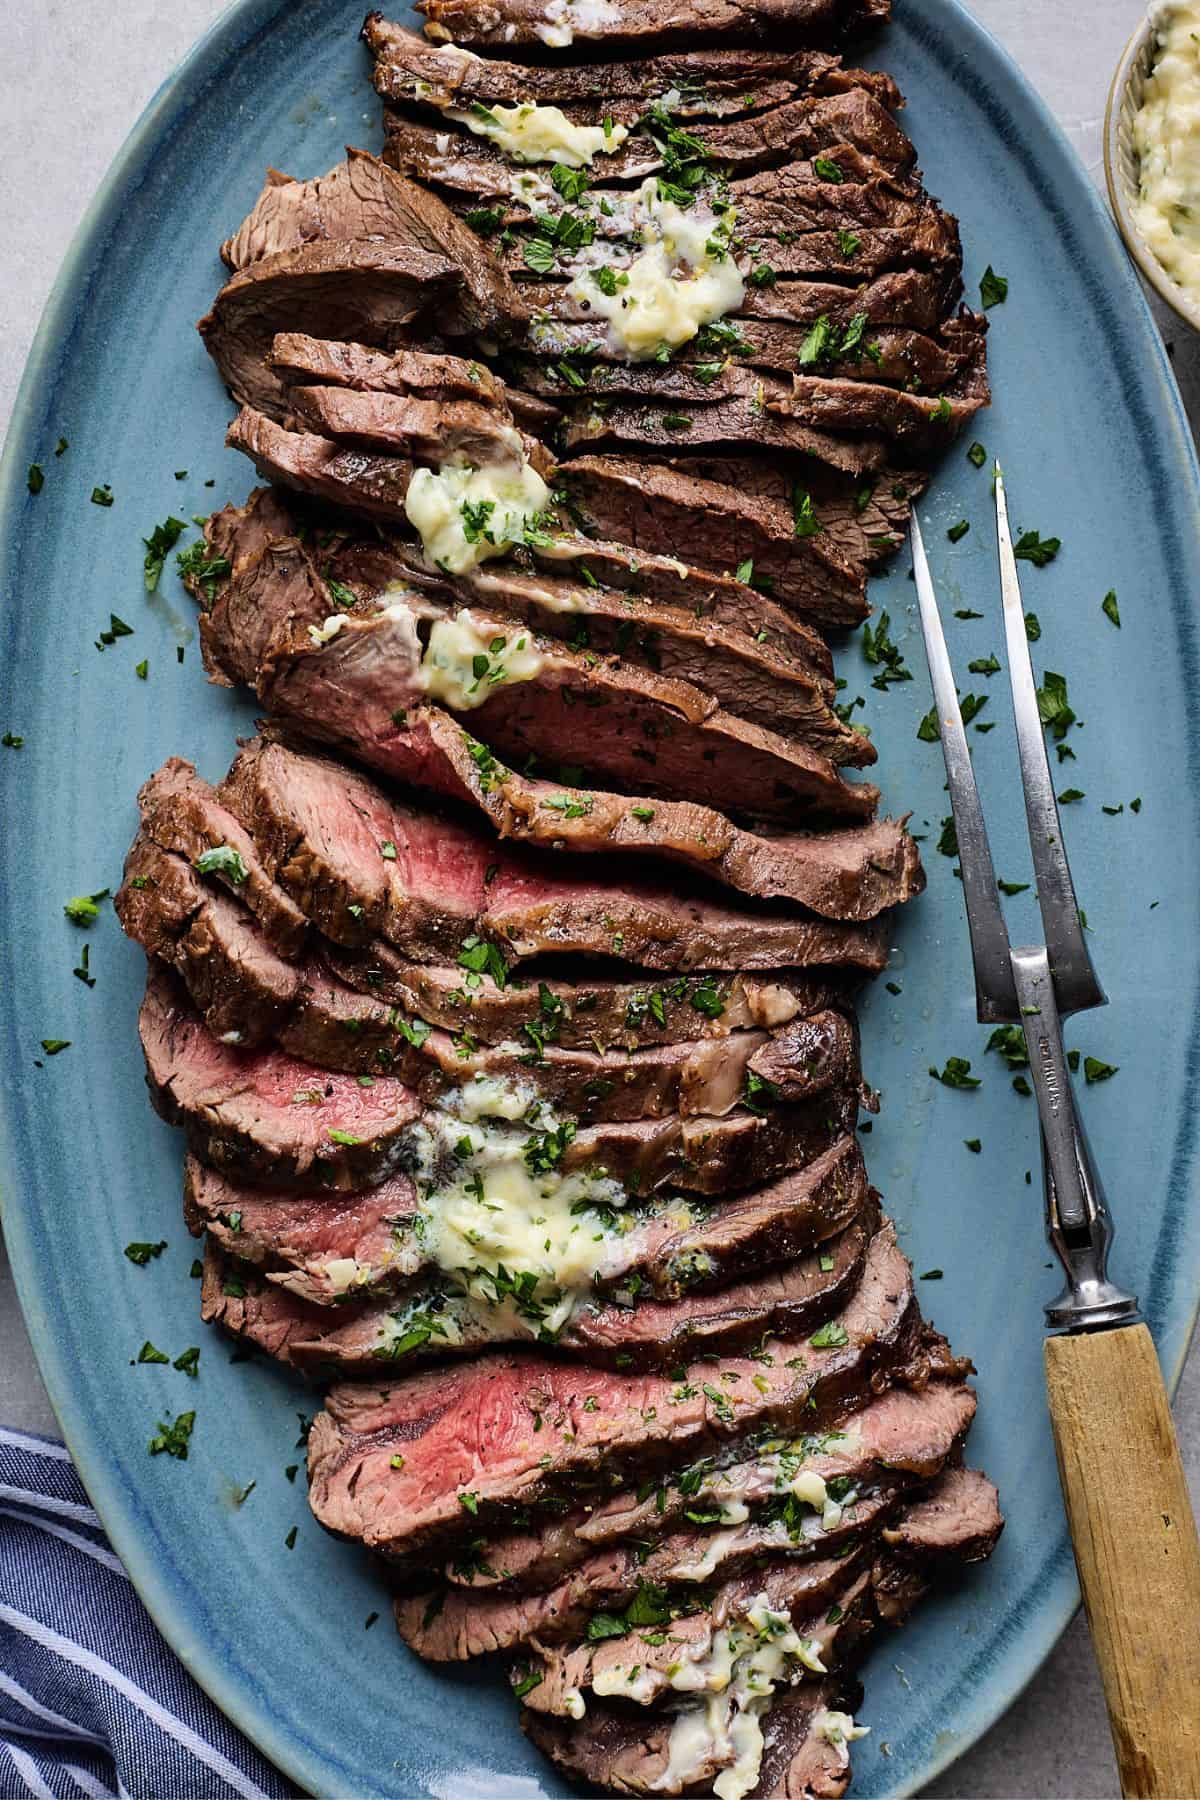 London broil smothered with herb butter sliced on a blue plate with a carving fork next to it